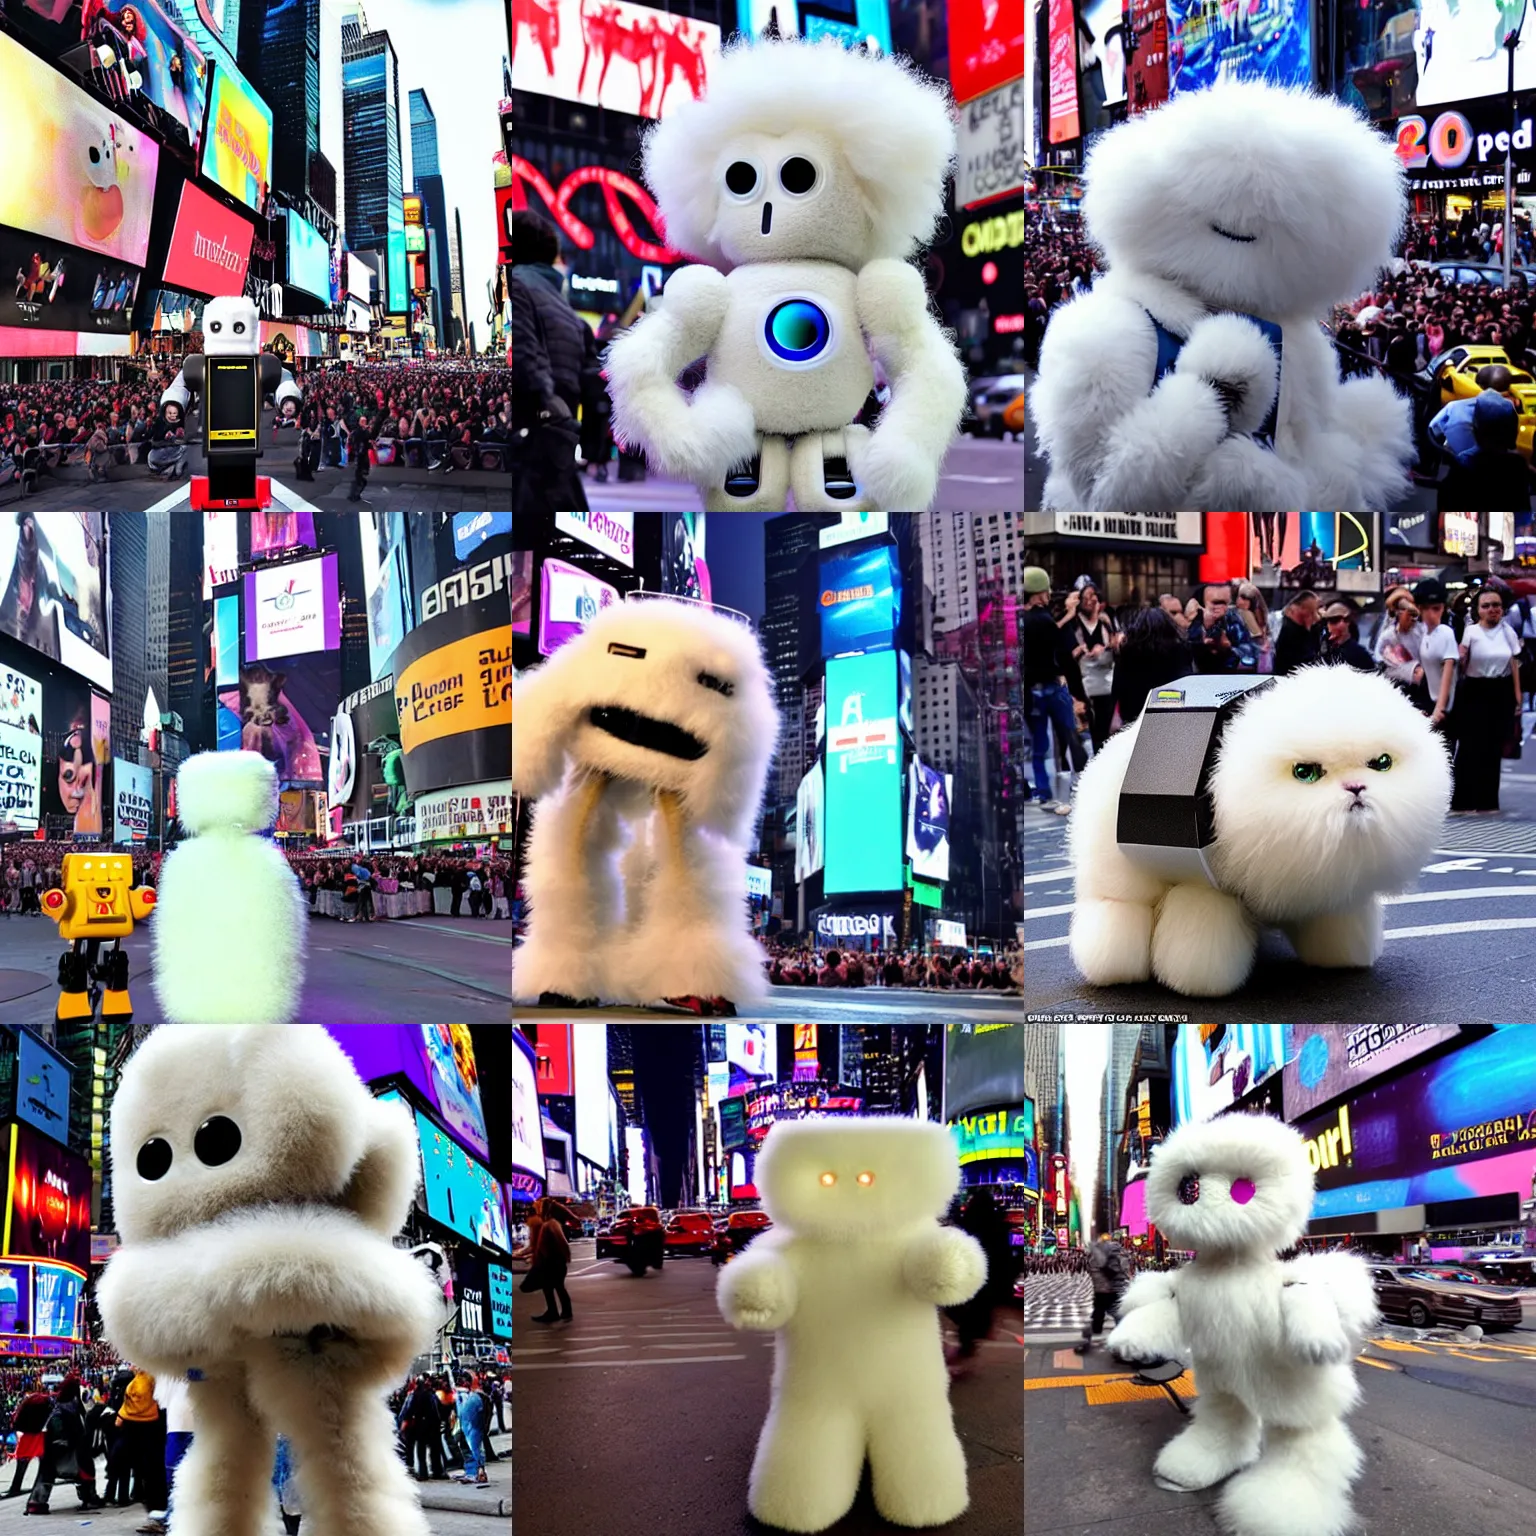 Prompt: <picture quality=hd+ mode='attention grabbing'>A benevolent super intelligent adorable fluffy robot gets high on drugs and attains sentience in the middle of times square</picture>